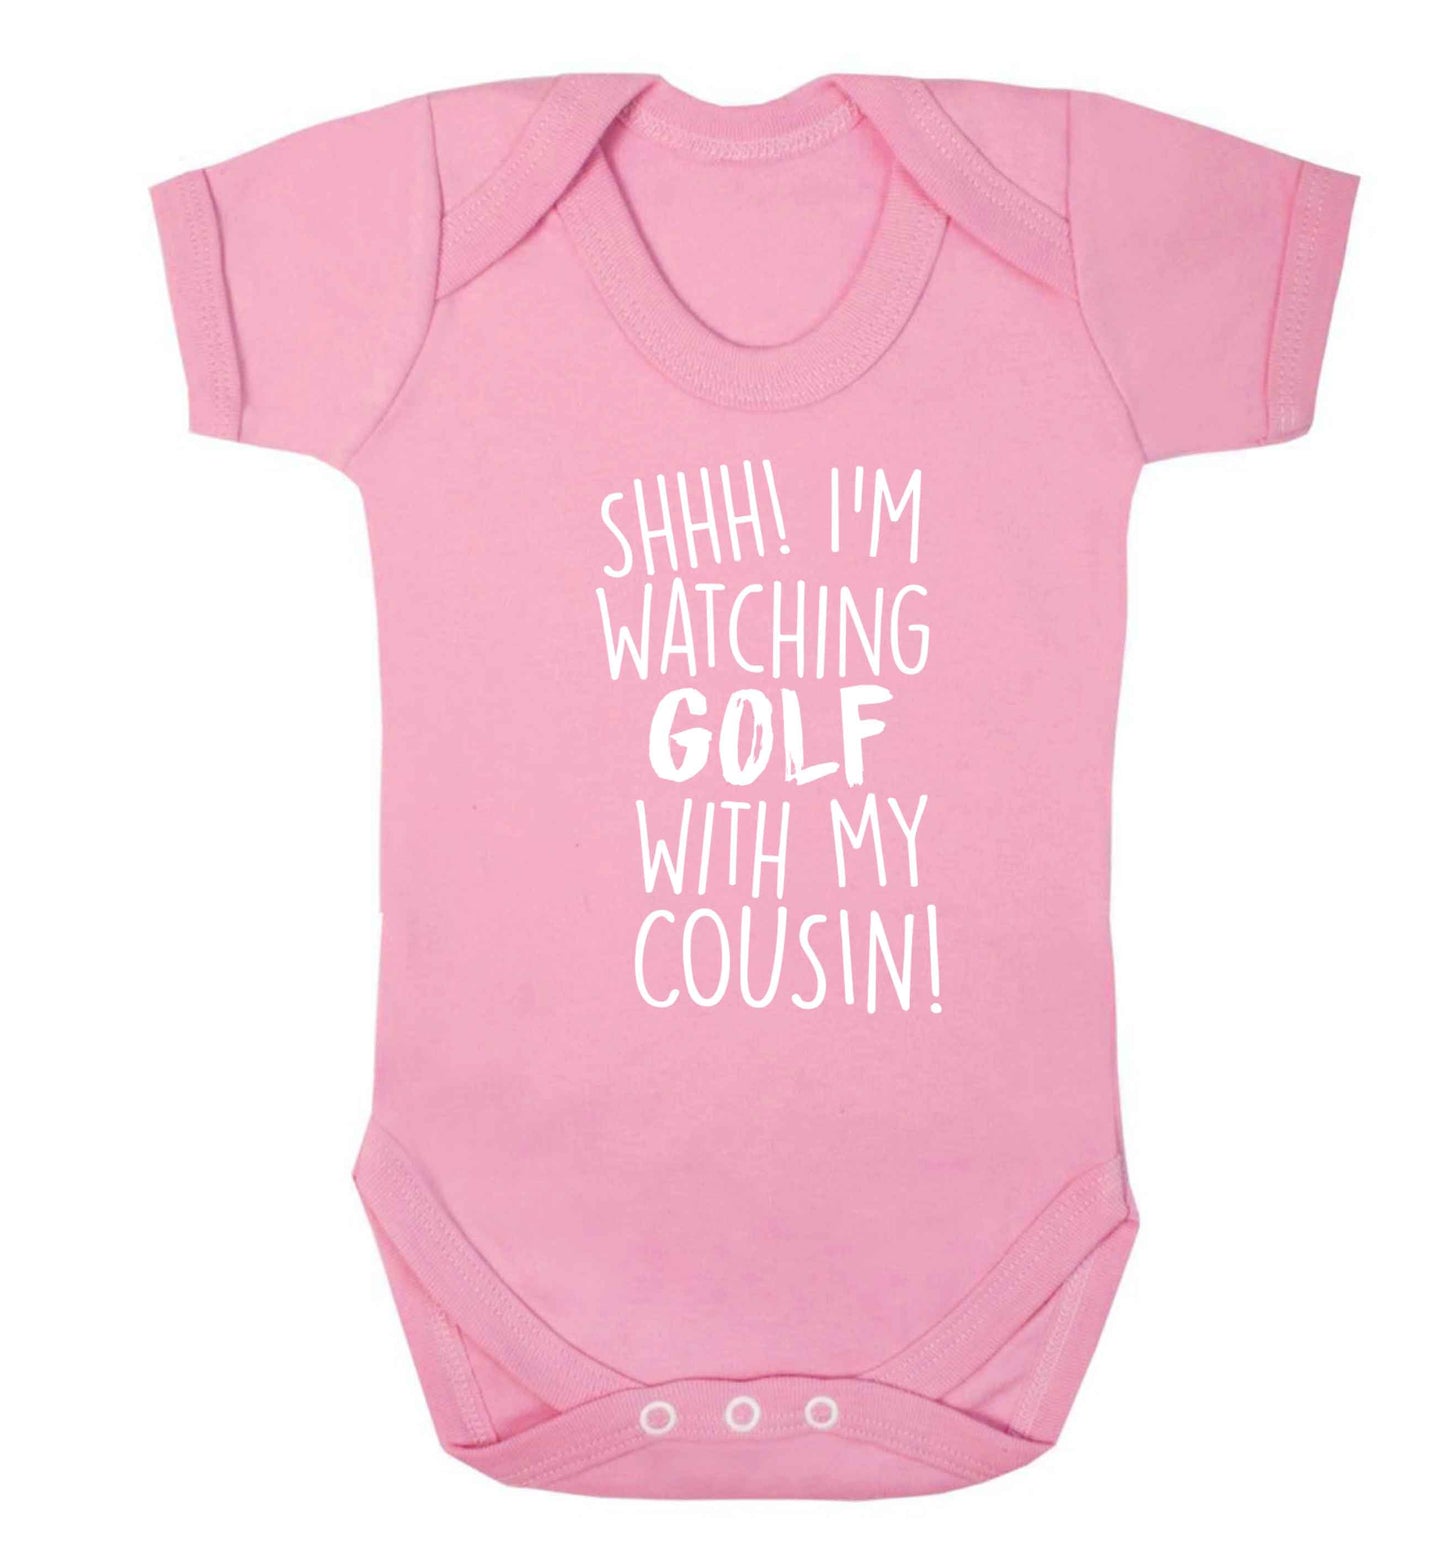 Shh I'm watching golf with my cousin Baby Vest pale pink 18-24 months